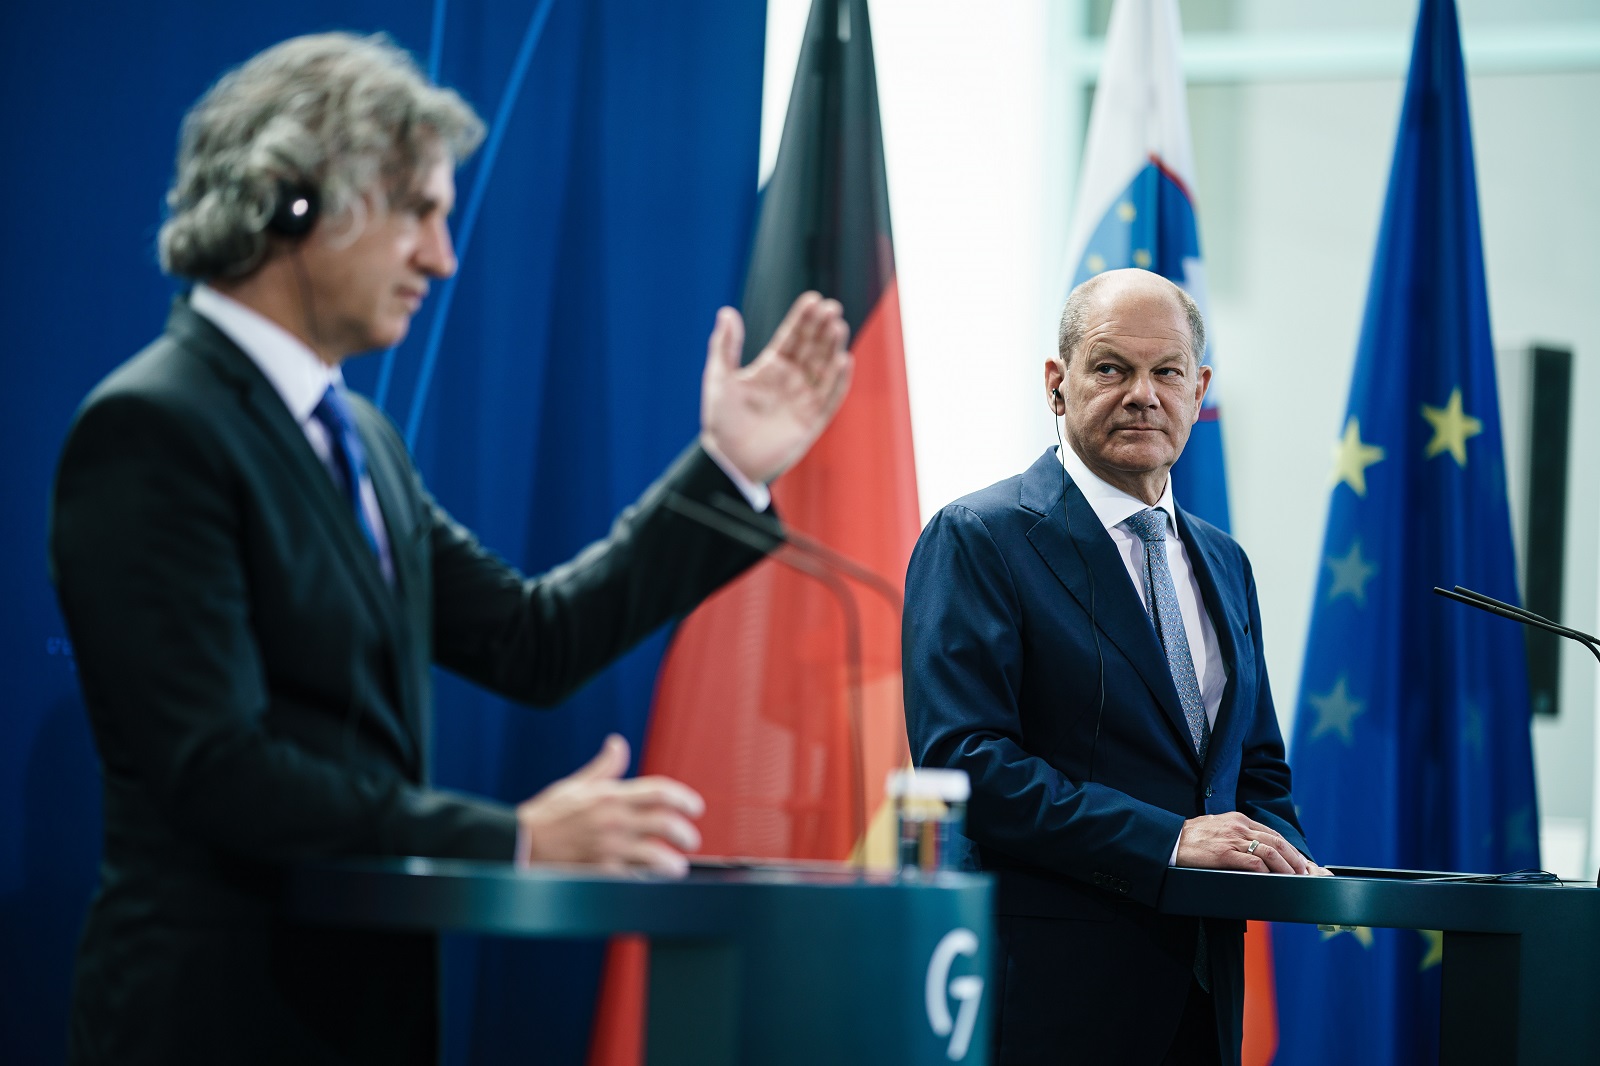 epa10066360 Slovenian Prime Minister Robert Golob (L) speaks next to German Chancellor Olaf Scholz during a joint press conference at the Chancellery in Berlin, Germany, 12 July 2022. Scholz and Golob met for bilateral talks.  EPA/CLEMENS BILAN